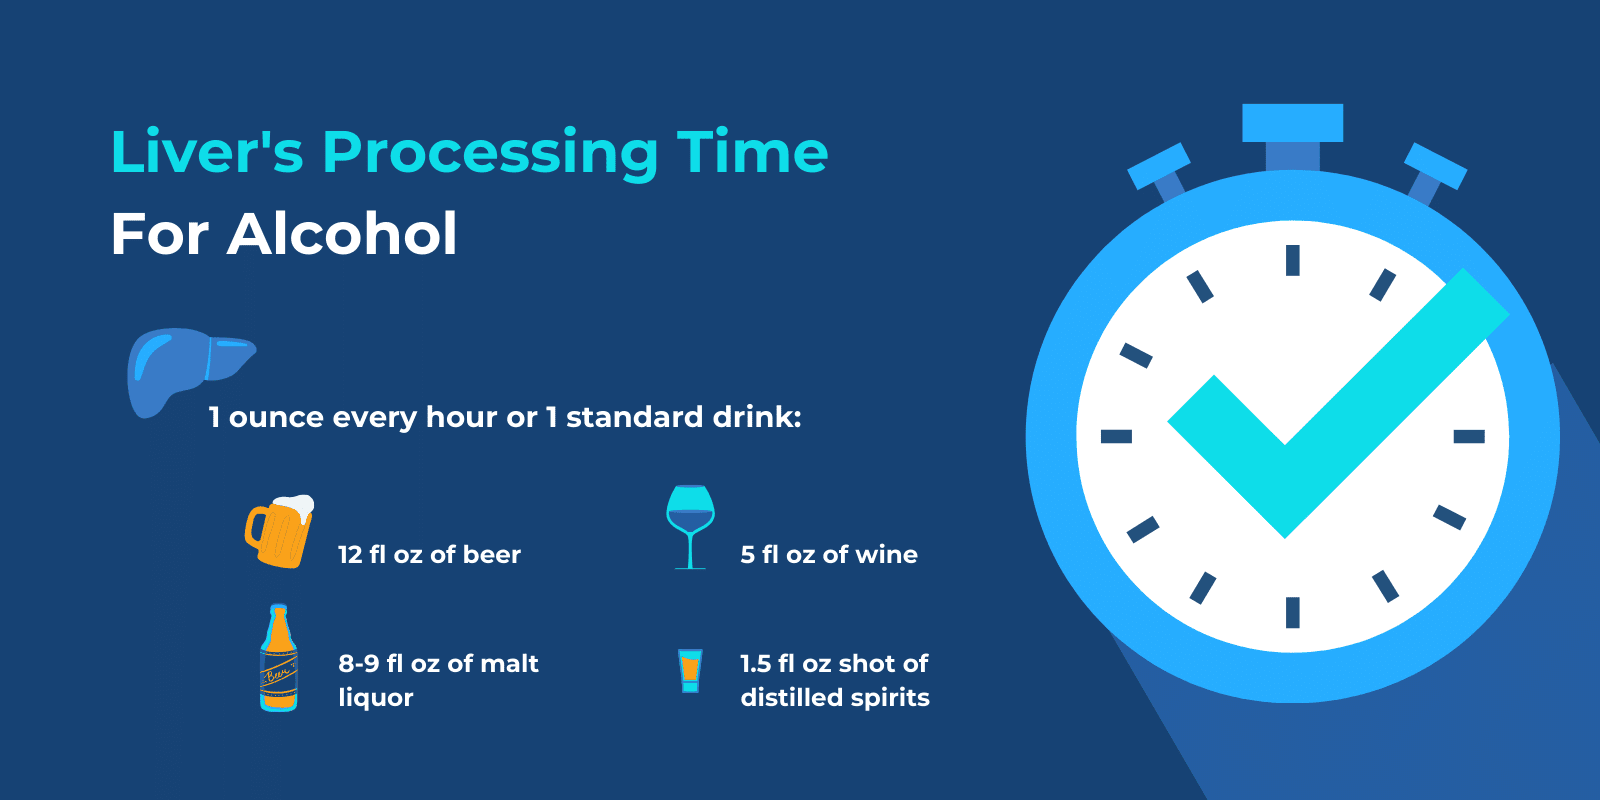 Liver's processing time for alcohol illustrated with the amount of standard drink per types of alcohol